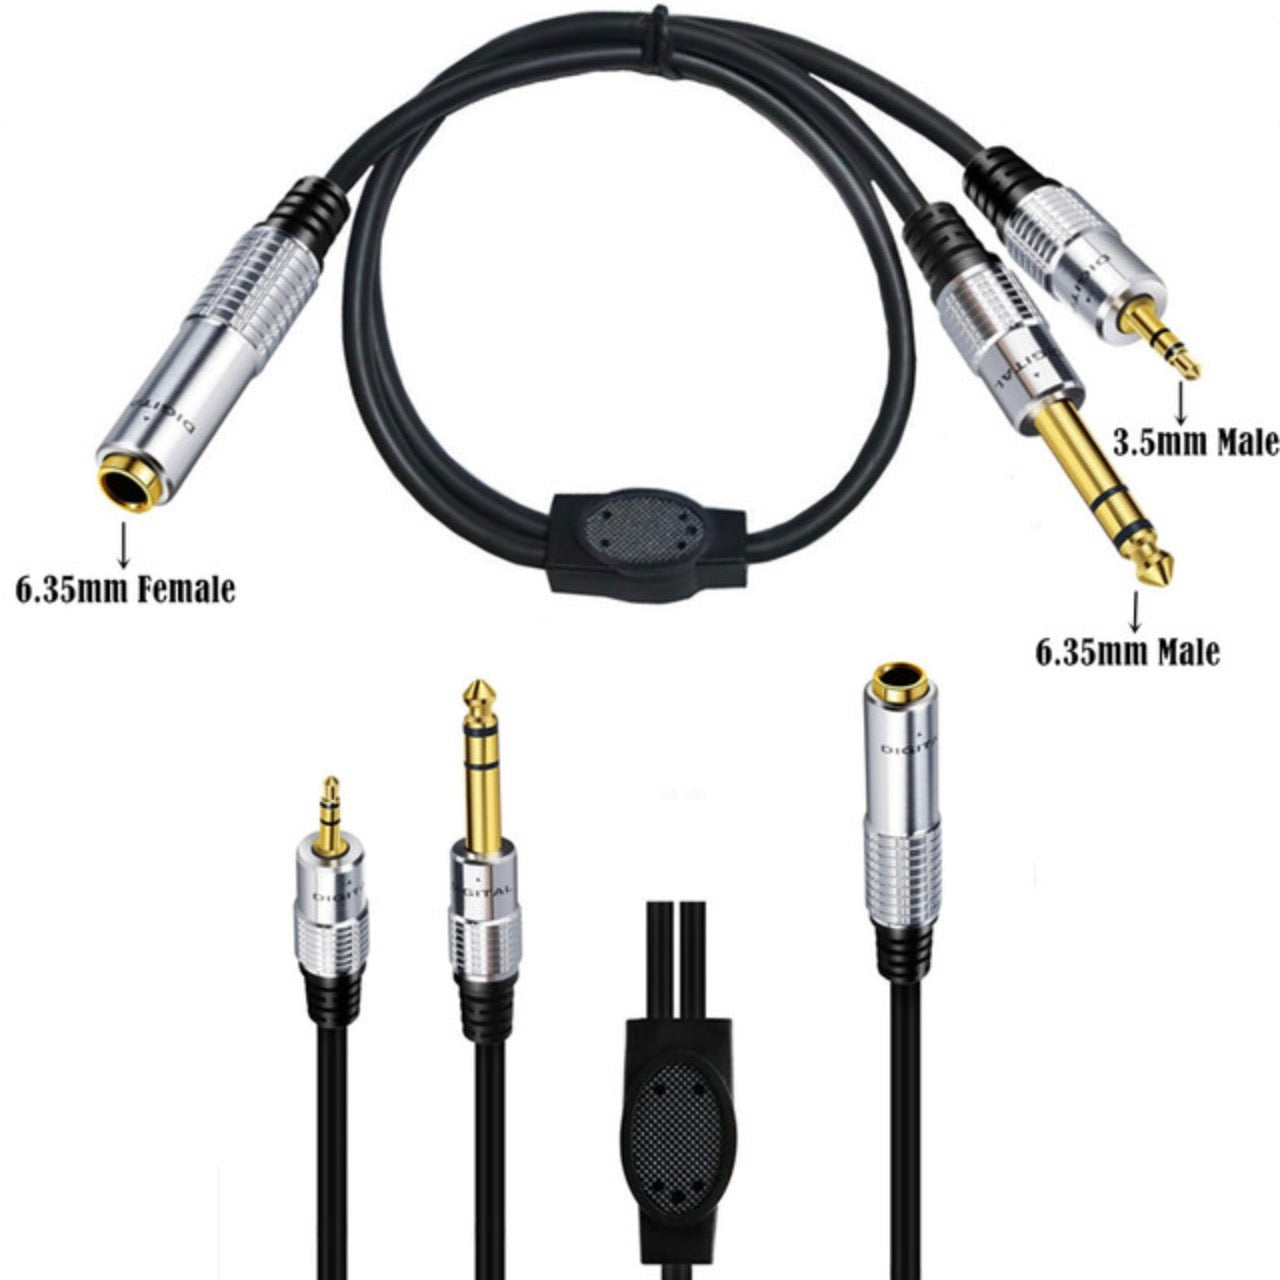 6.35mm Female to 3.5mm 1/4" inch Male + 6.35mm Male Stereo Headphone Guitar Extension Cable 0.5m